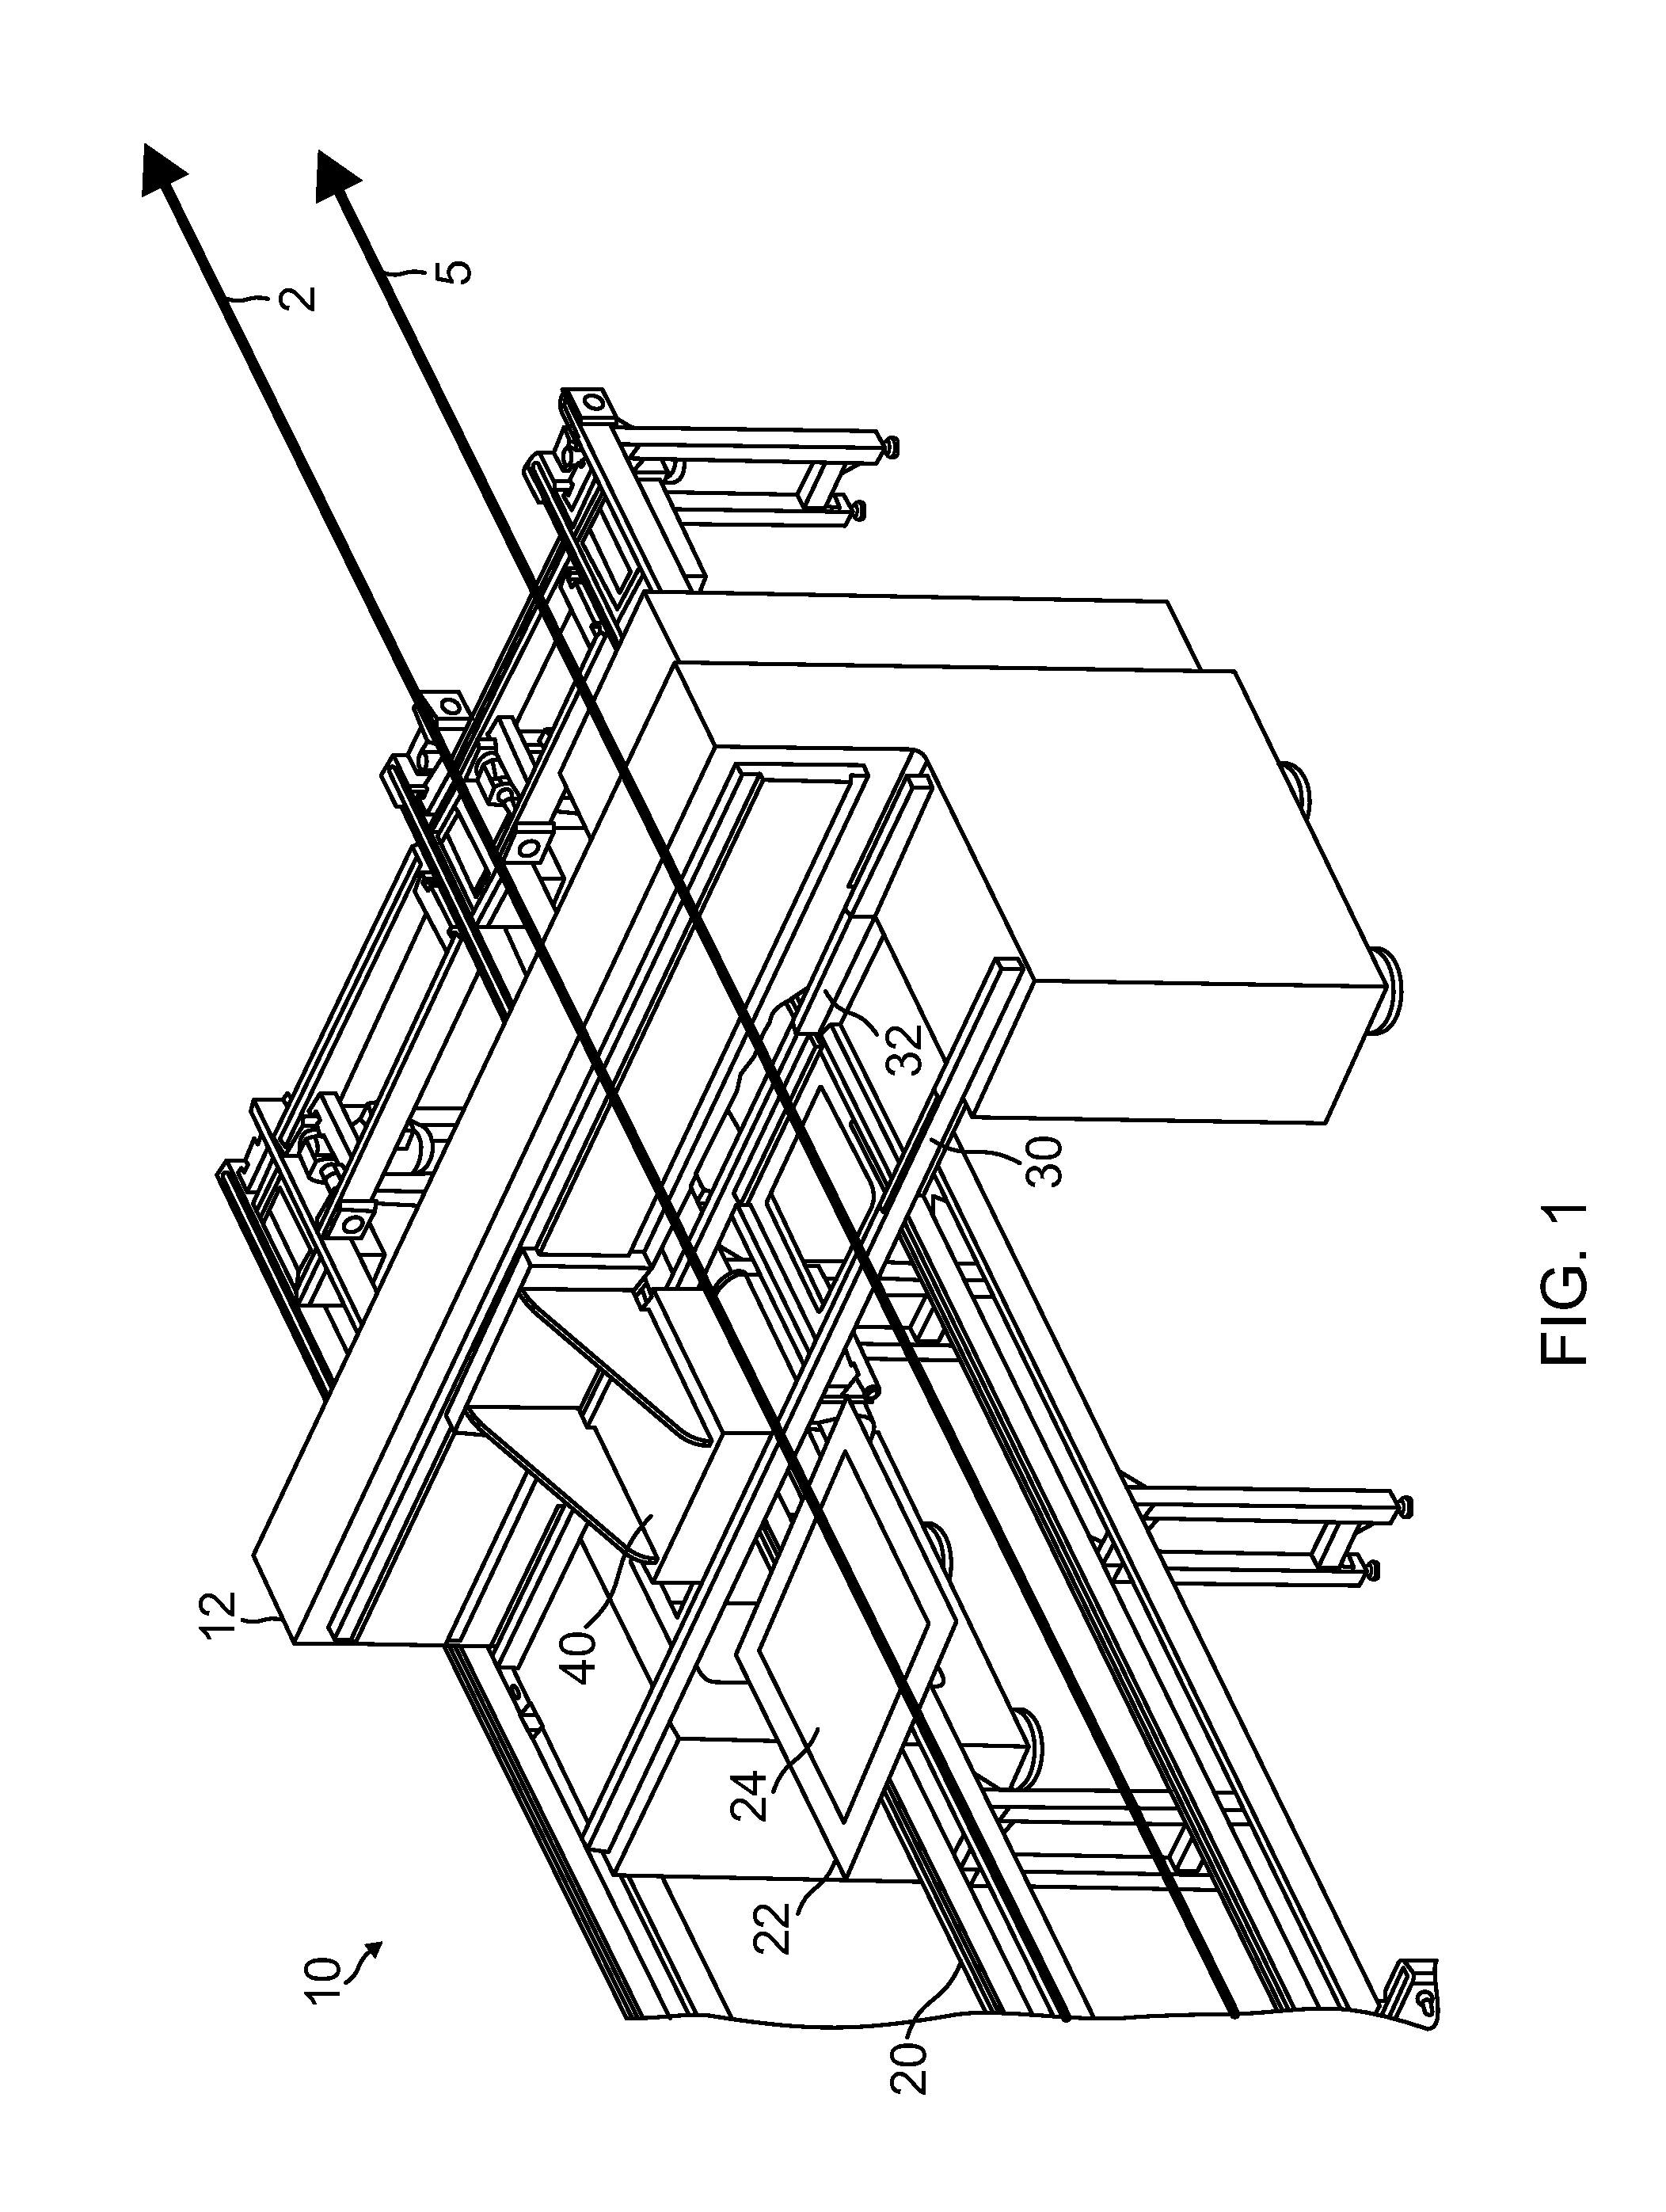 Print head pre-alignment systems and methods